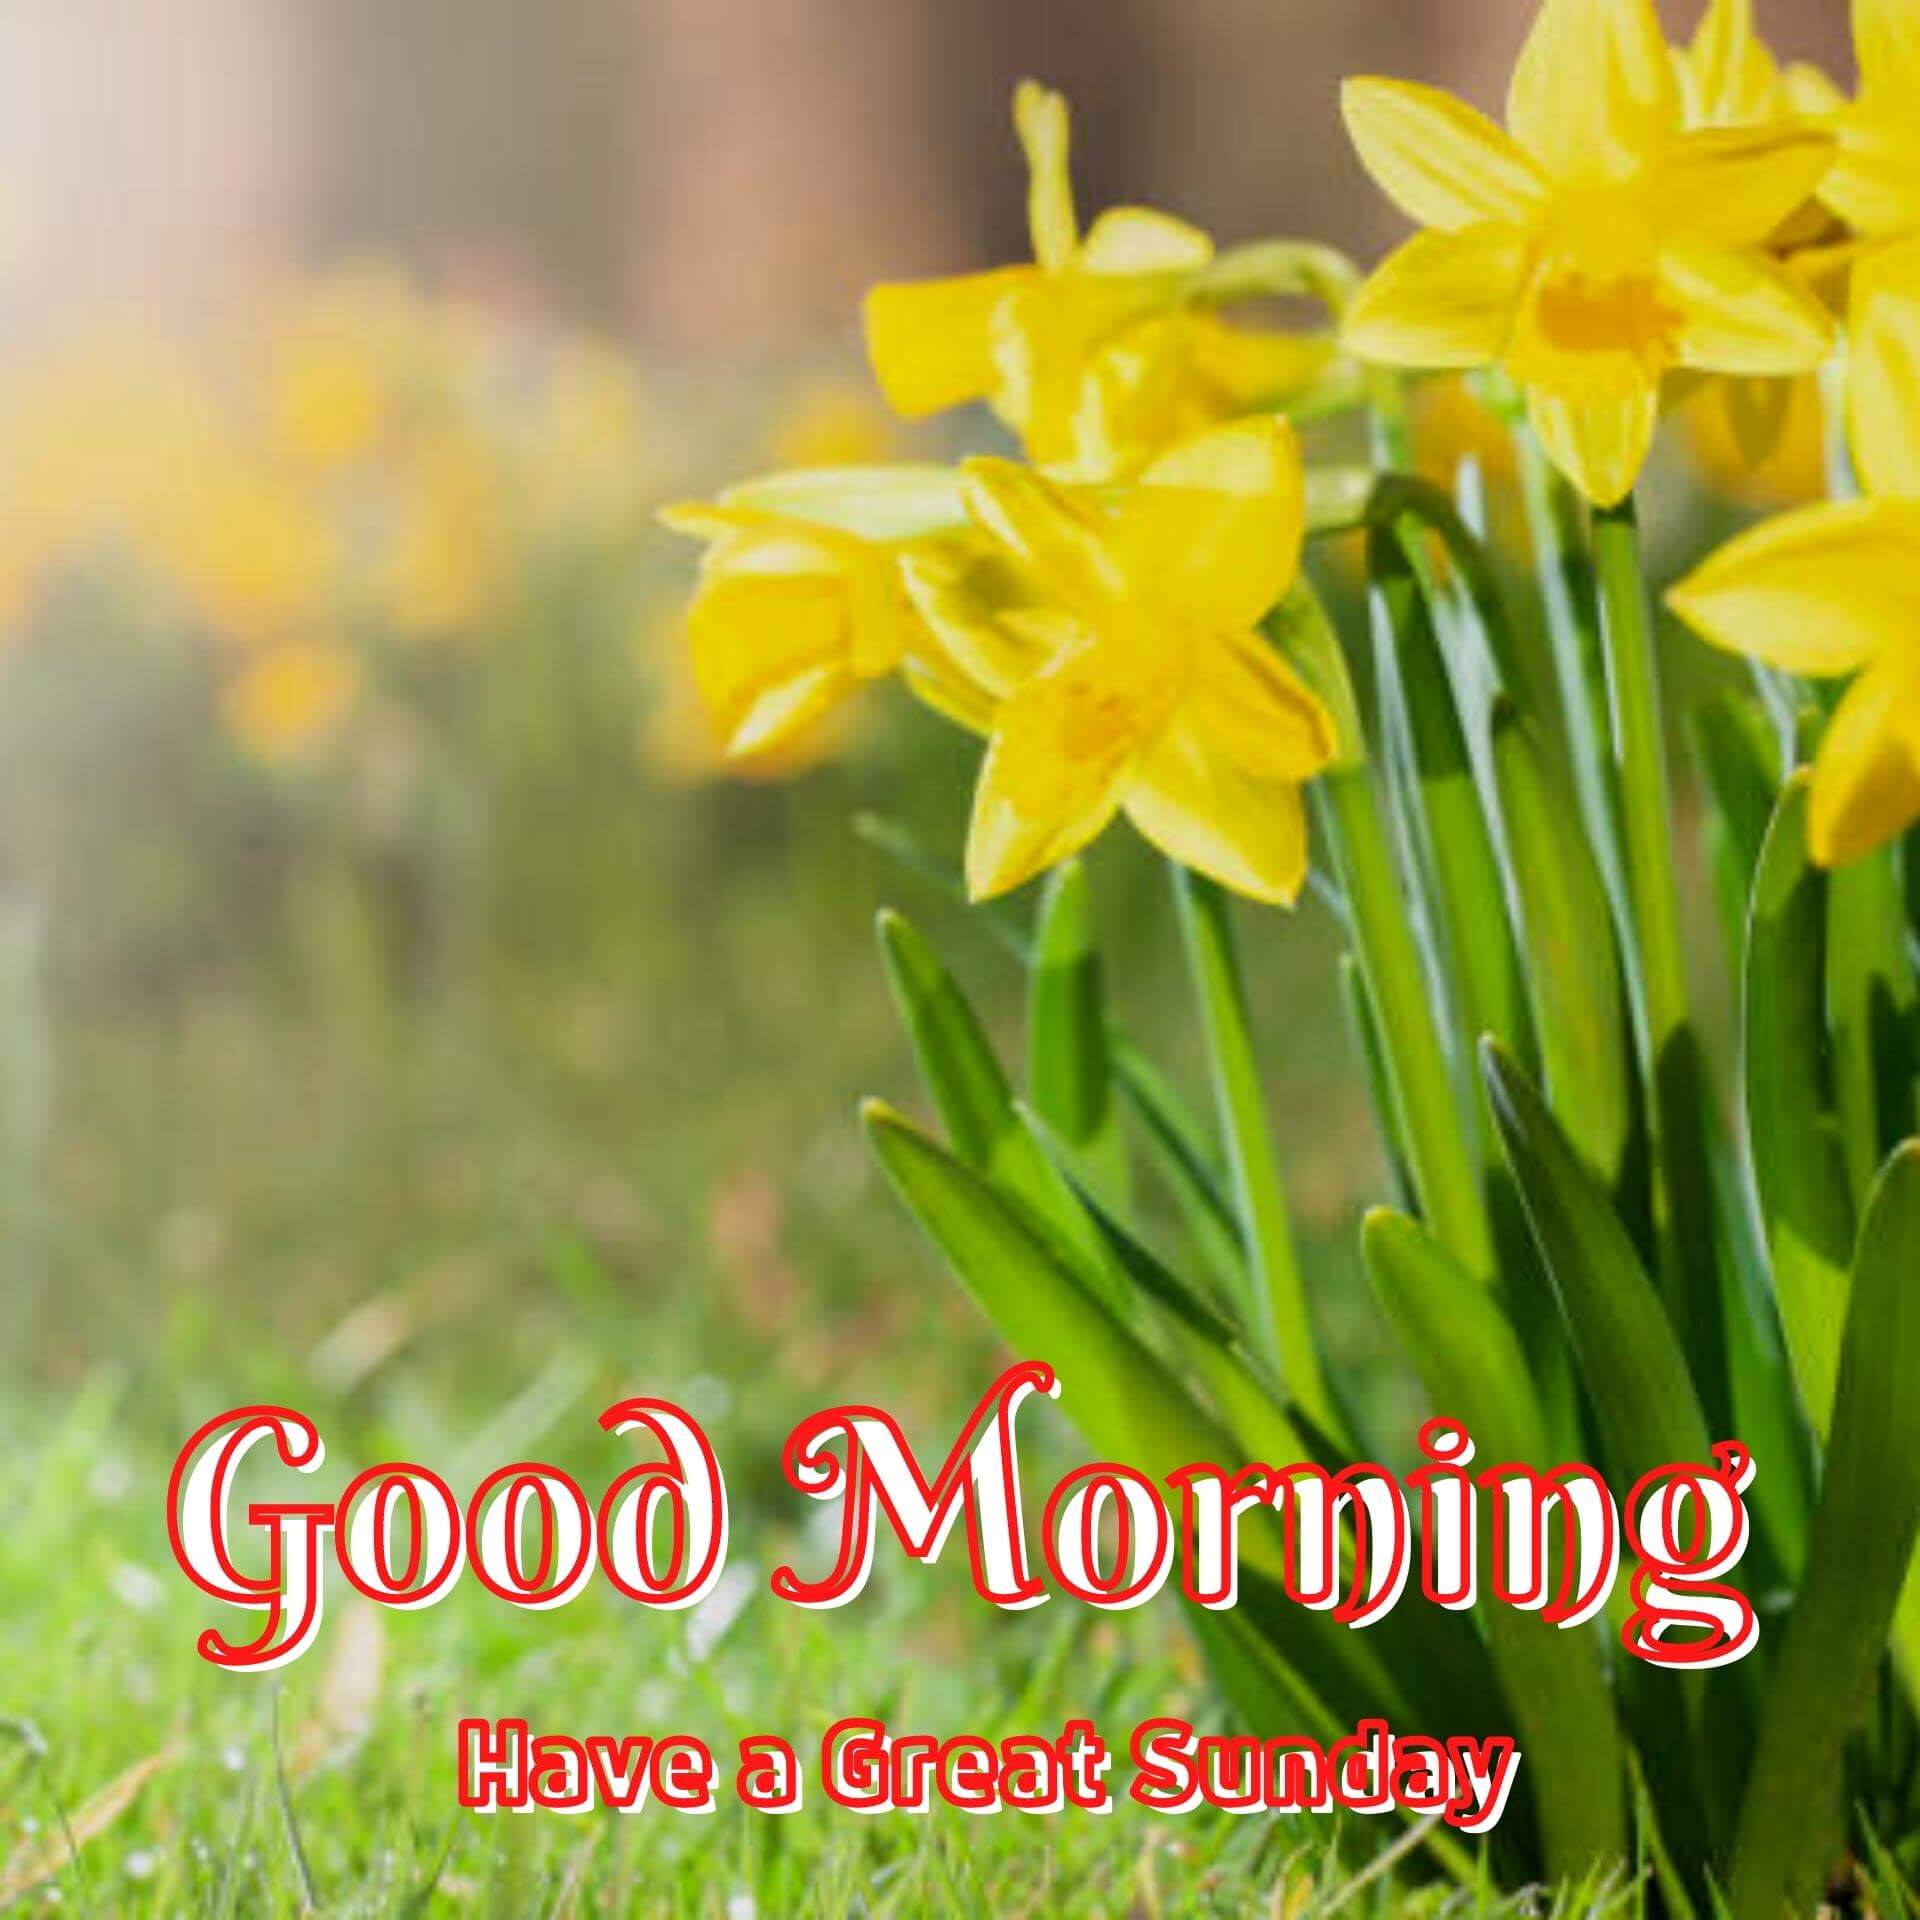 Free New HD Sunday Good Morning Images Download